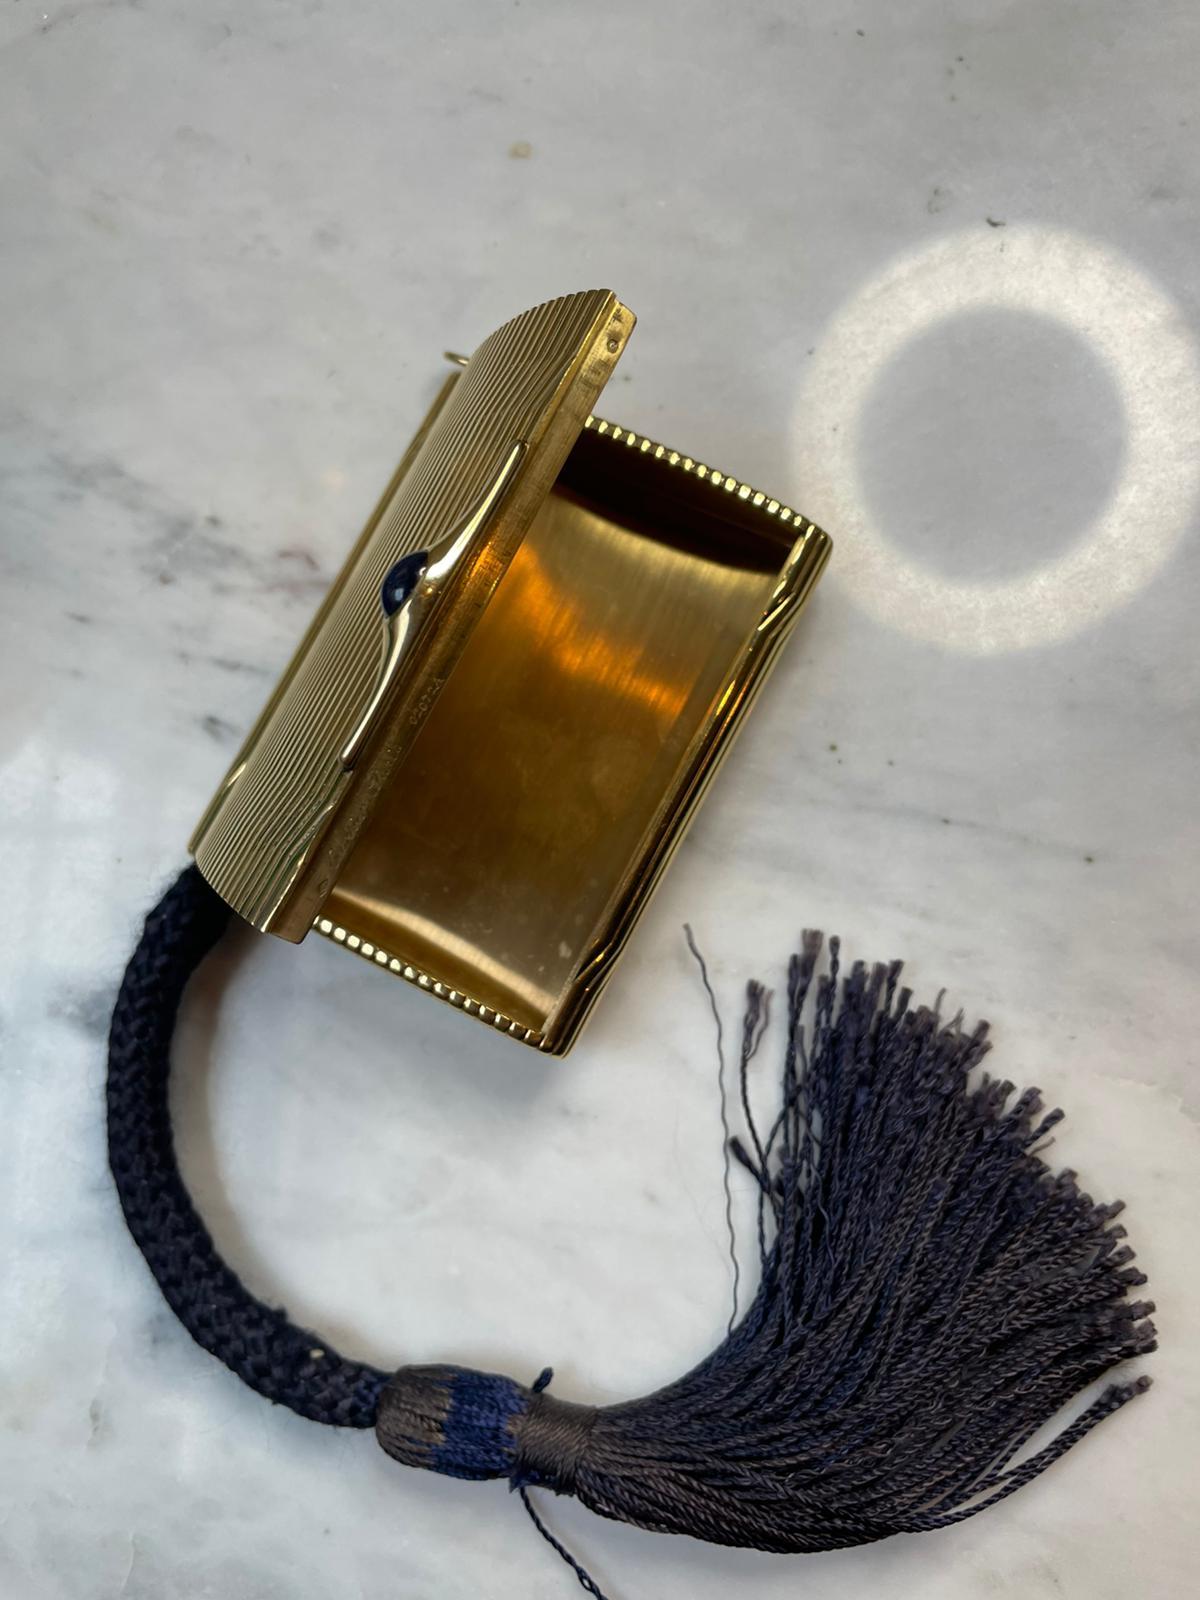 A Cartier sapphire set cigarette and lighter evening gold purse, circa 1930.

Originating from Paris circa 1930. This rare and unusual case is set with a cabochon sapphire as its thumb piece,  featuring a very typical design of the transitional age